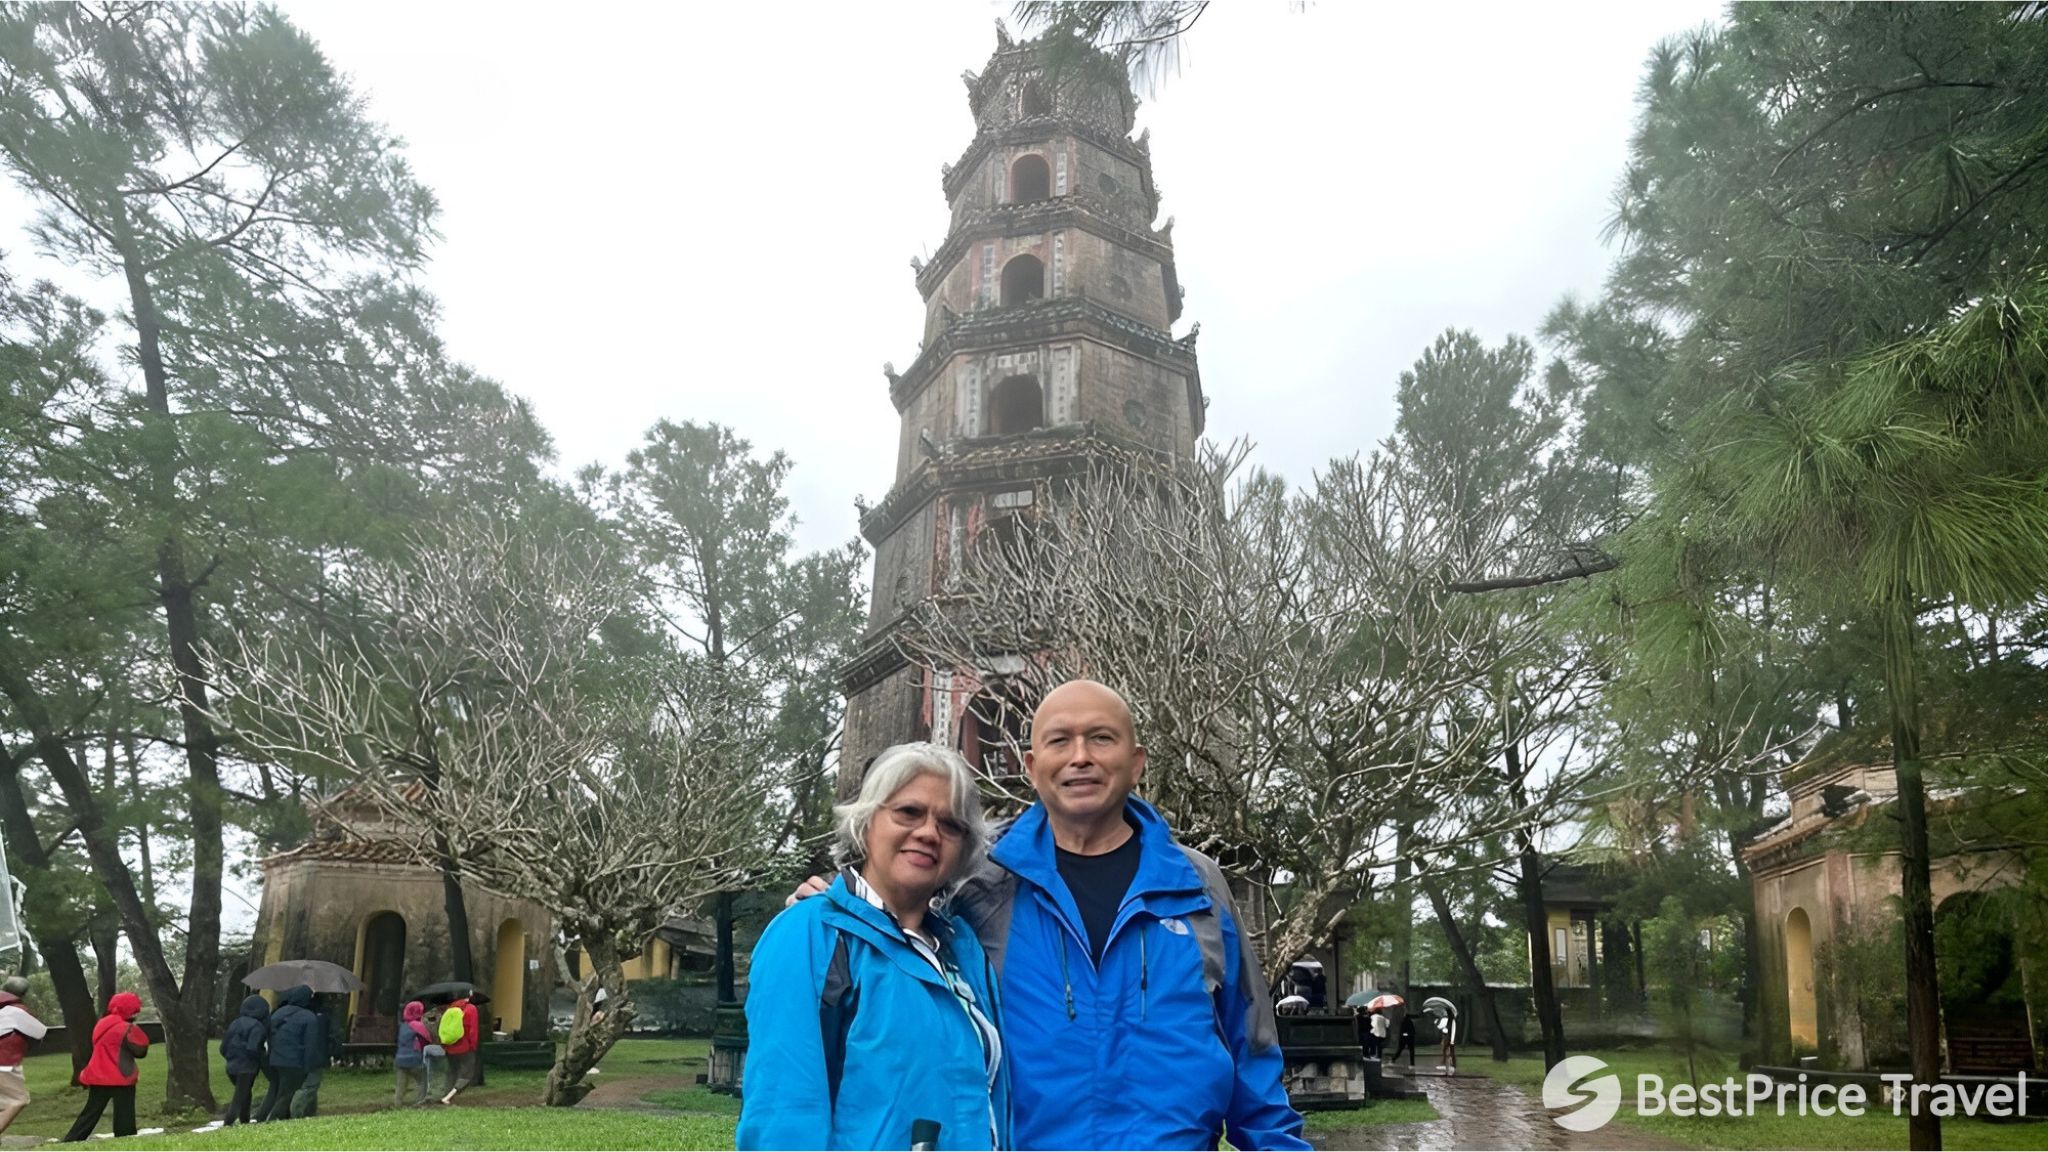 Day 6 Check In With The 400 Year Old Thien Mu Pagoda